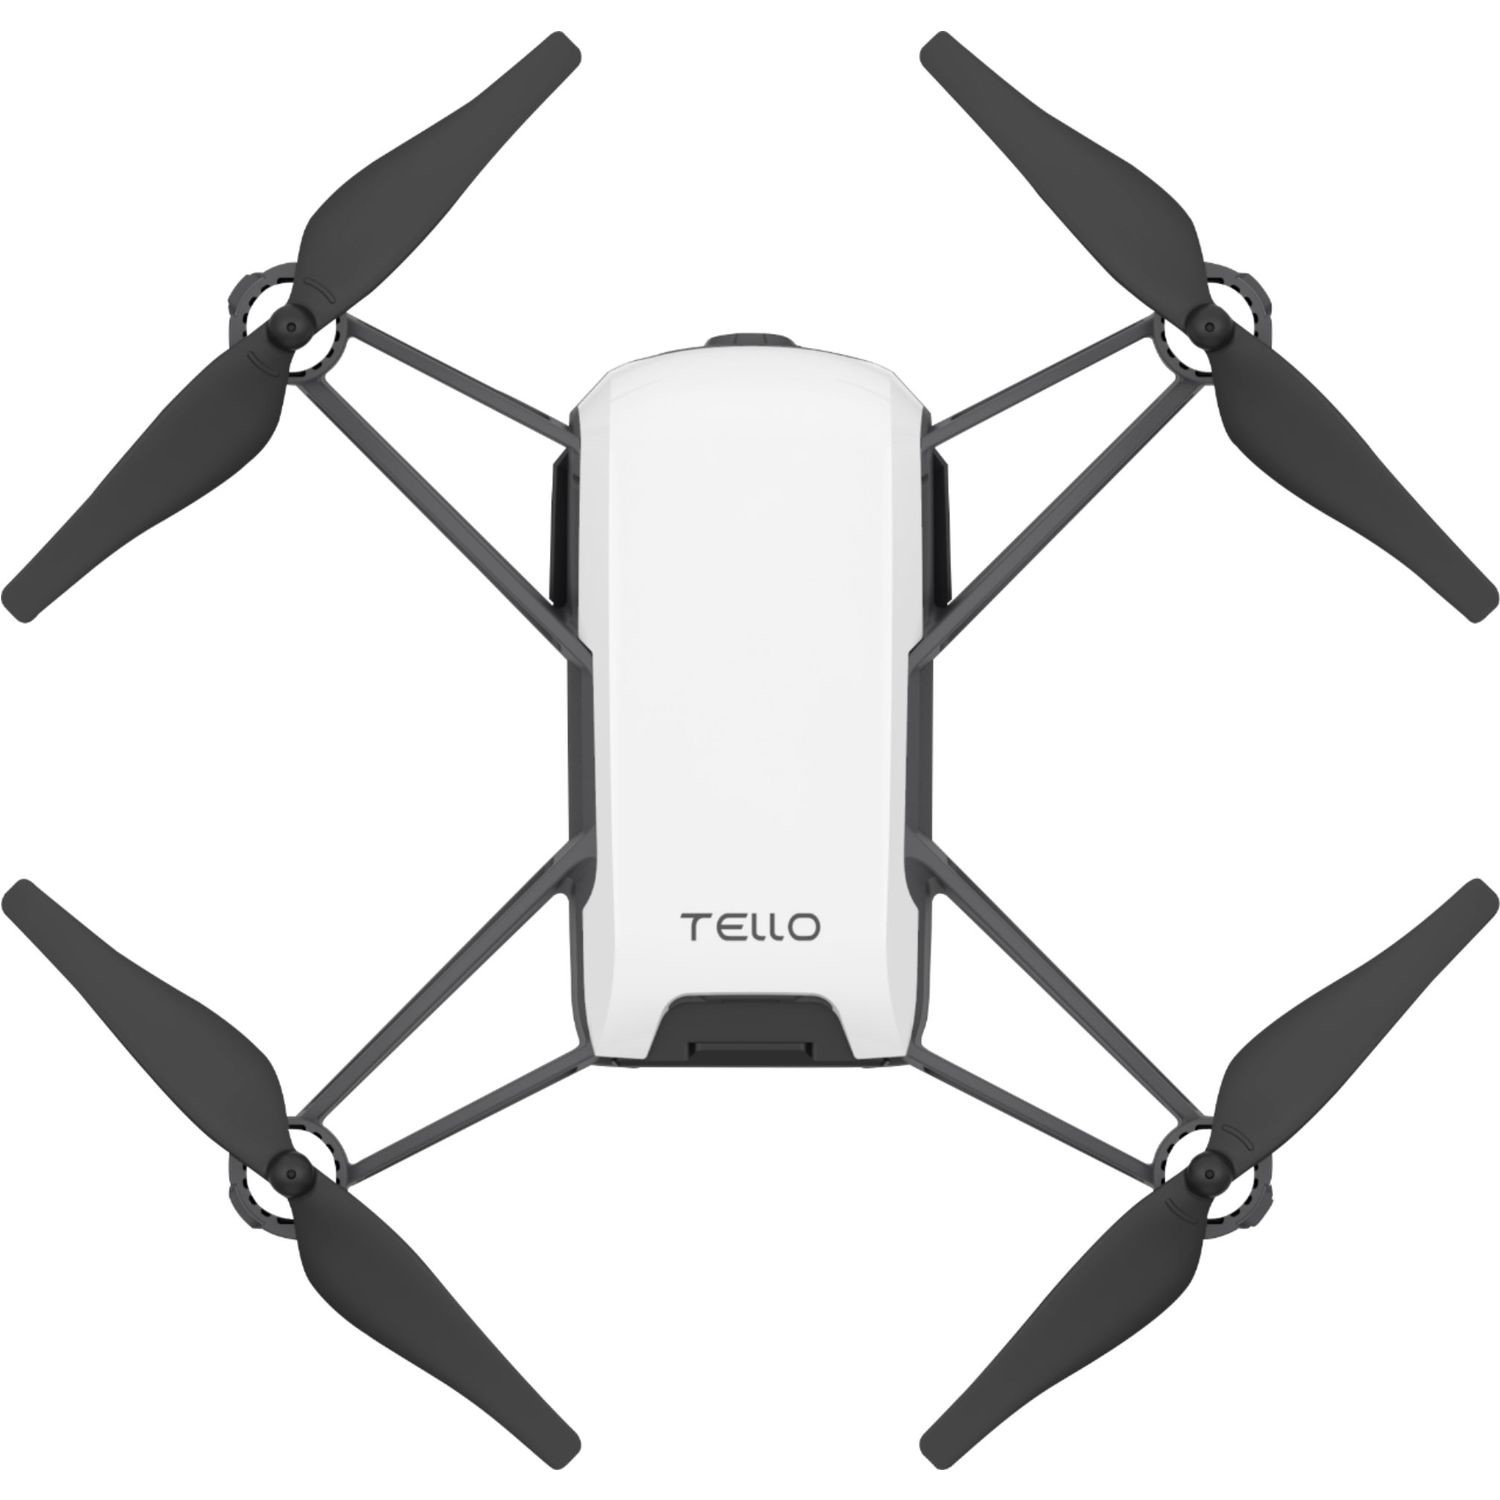 Tello Drone - Powered by DJI CP.PT.00000210.01 | Drones Direct